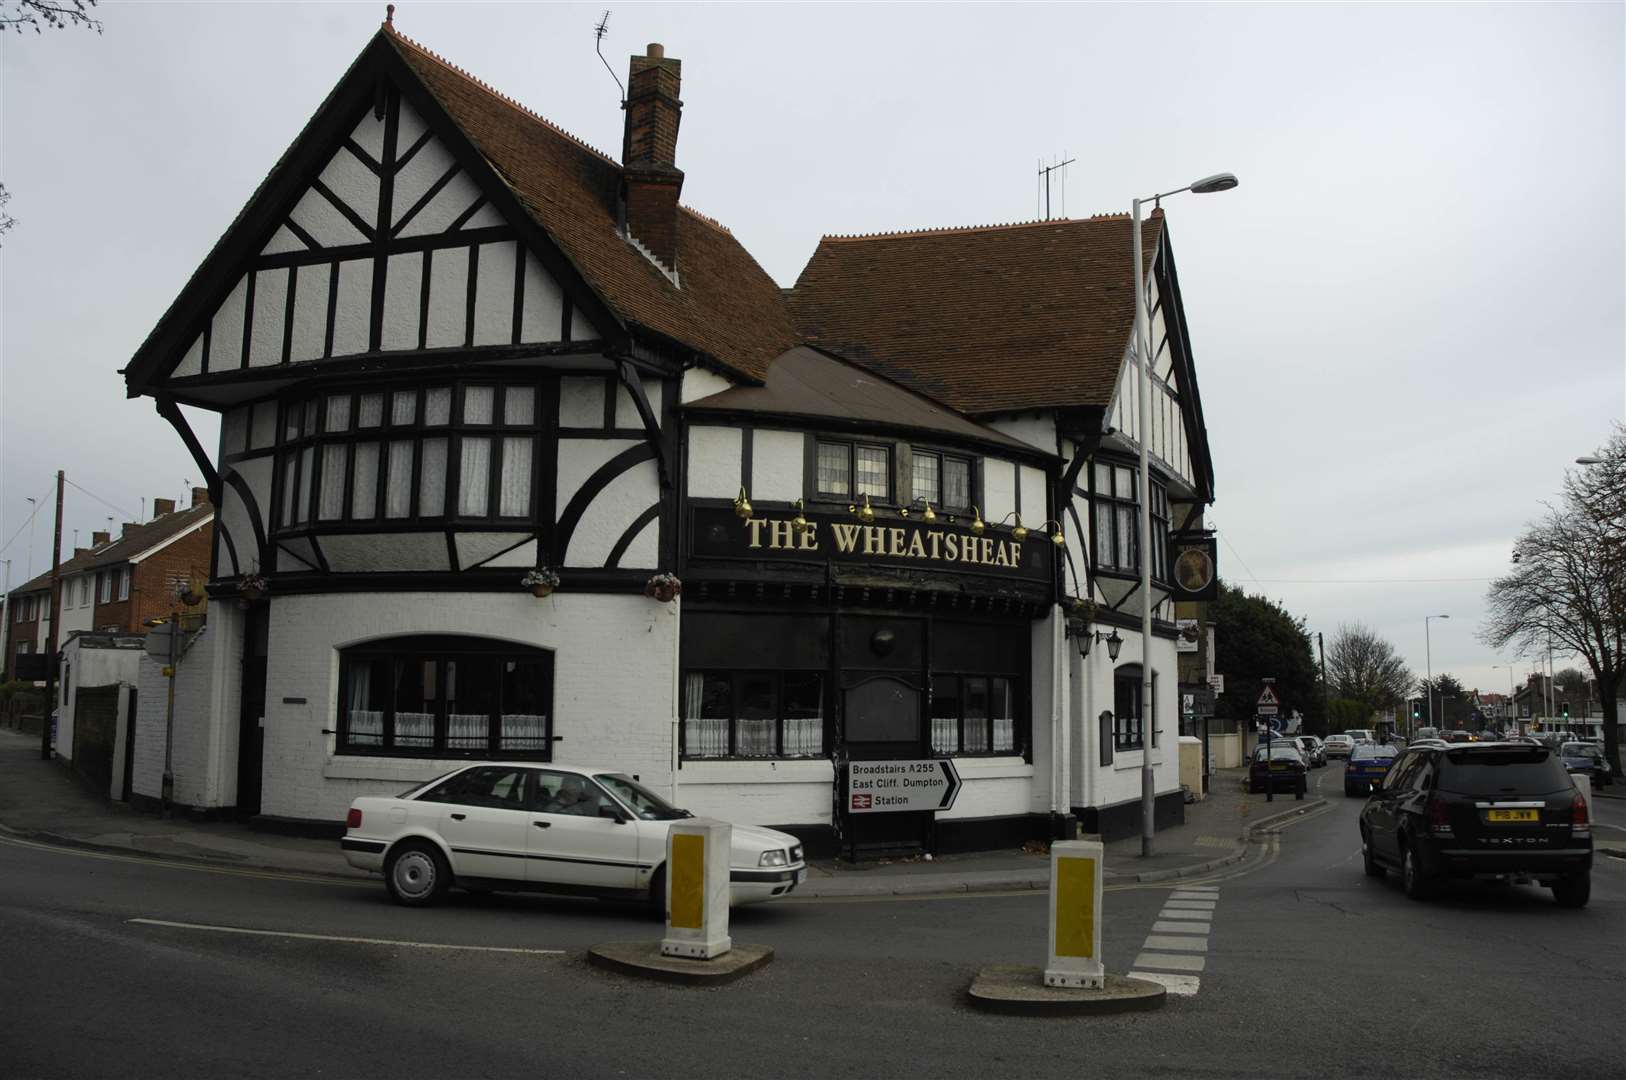 Plans have been submitted to transform The Wheatsheaf Inn in St Lawrence, Ramsgate, into flats